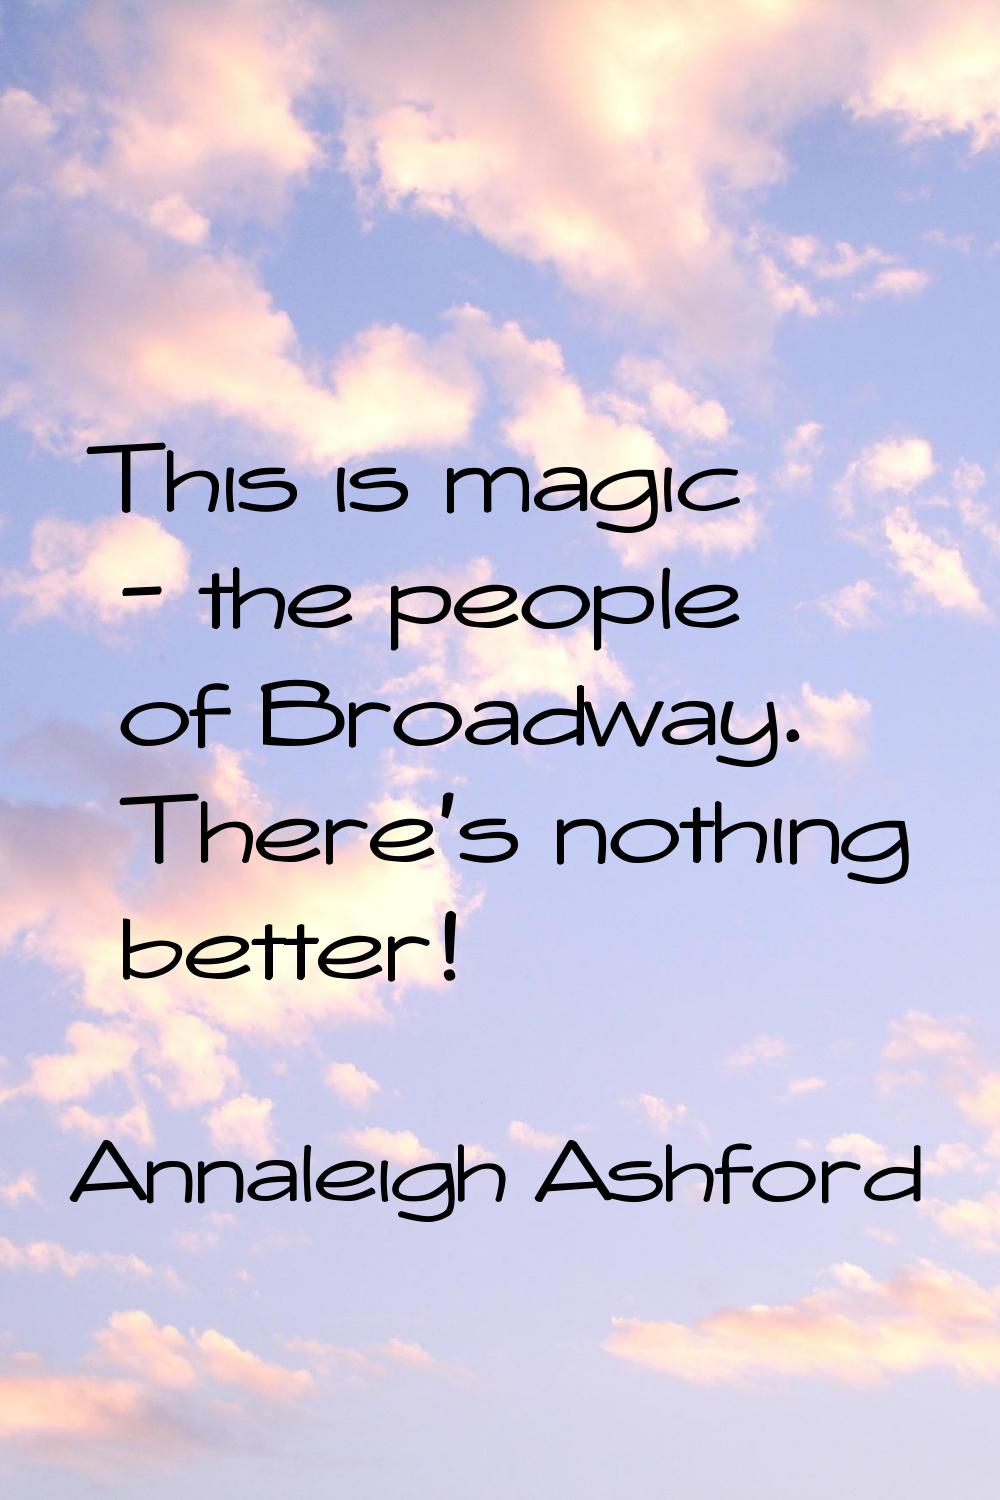 This is magic - the people of Broadway. There's nothing better!